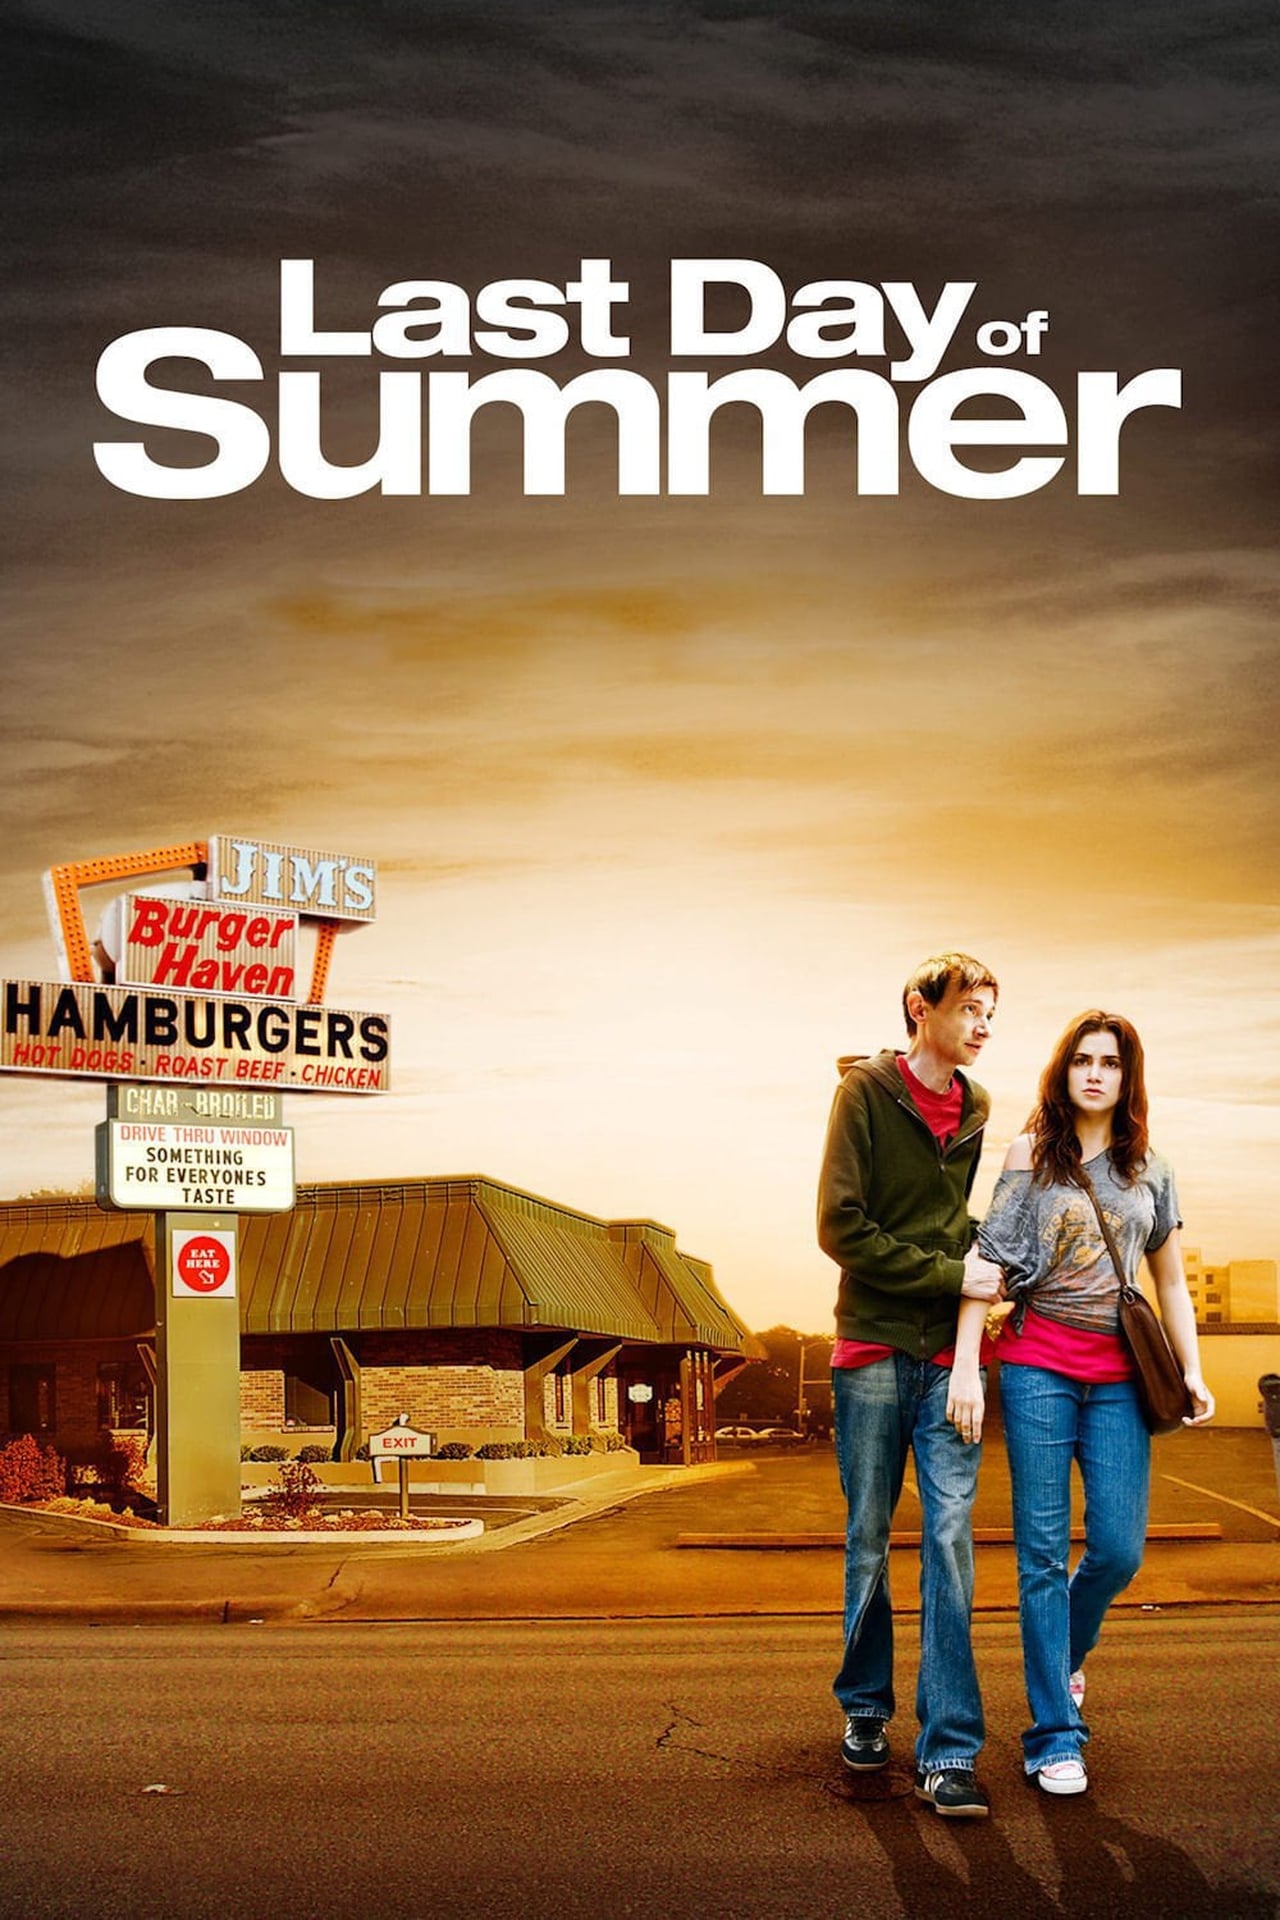 Last Day of Summer wiki, synopsis, reviews, watch and download